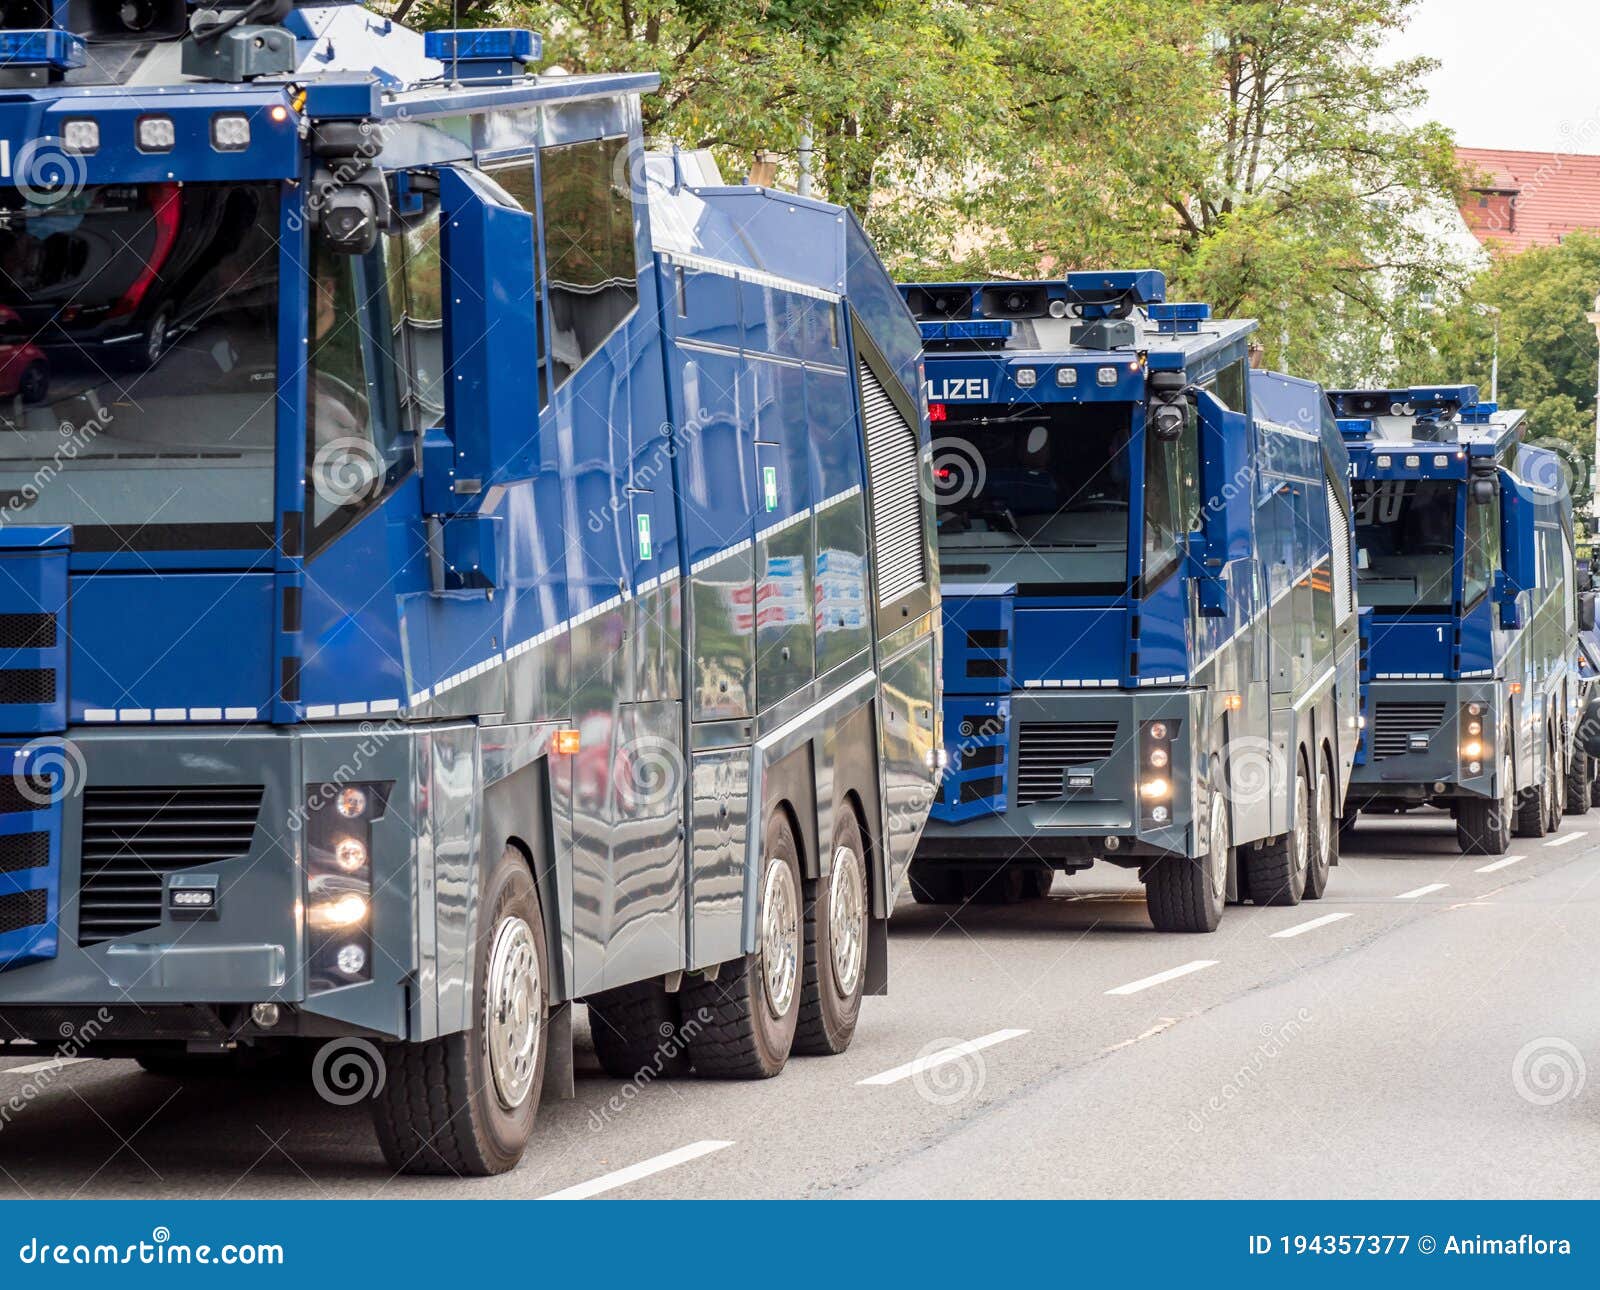 water cannon of the federal police